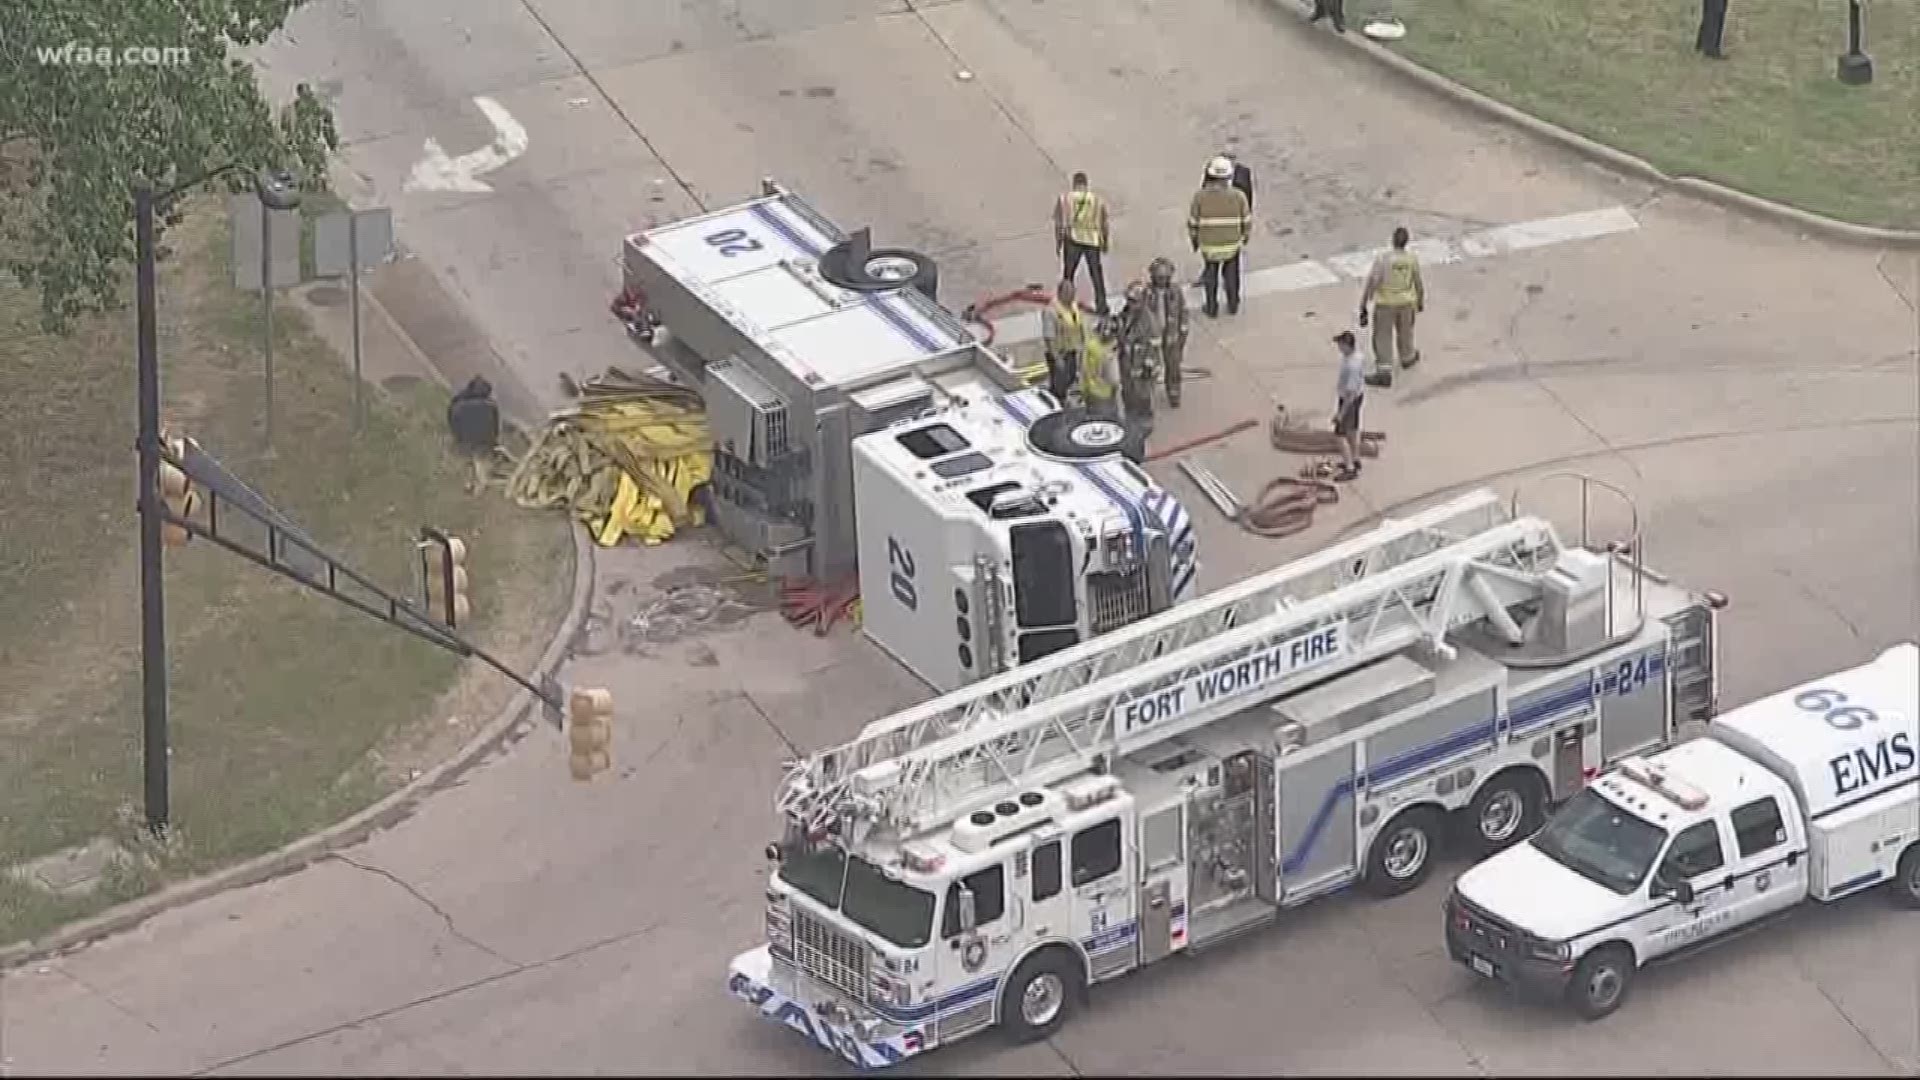 Fire truck overturns after crash in Fort Worth